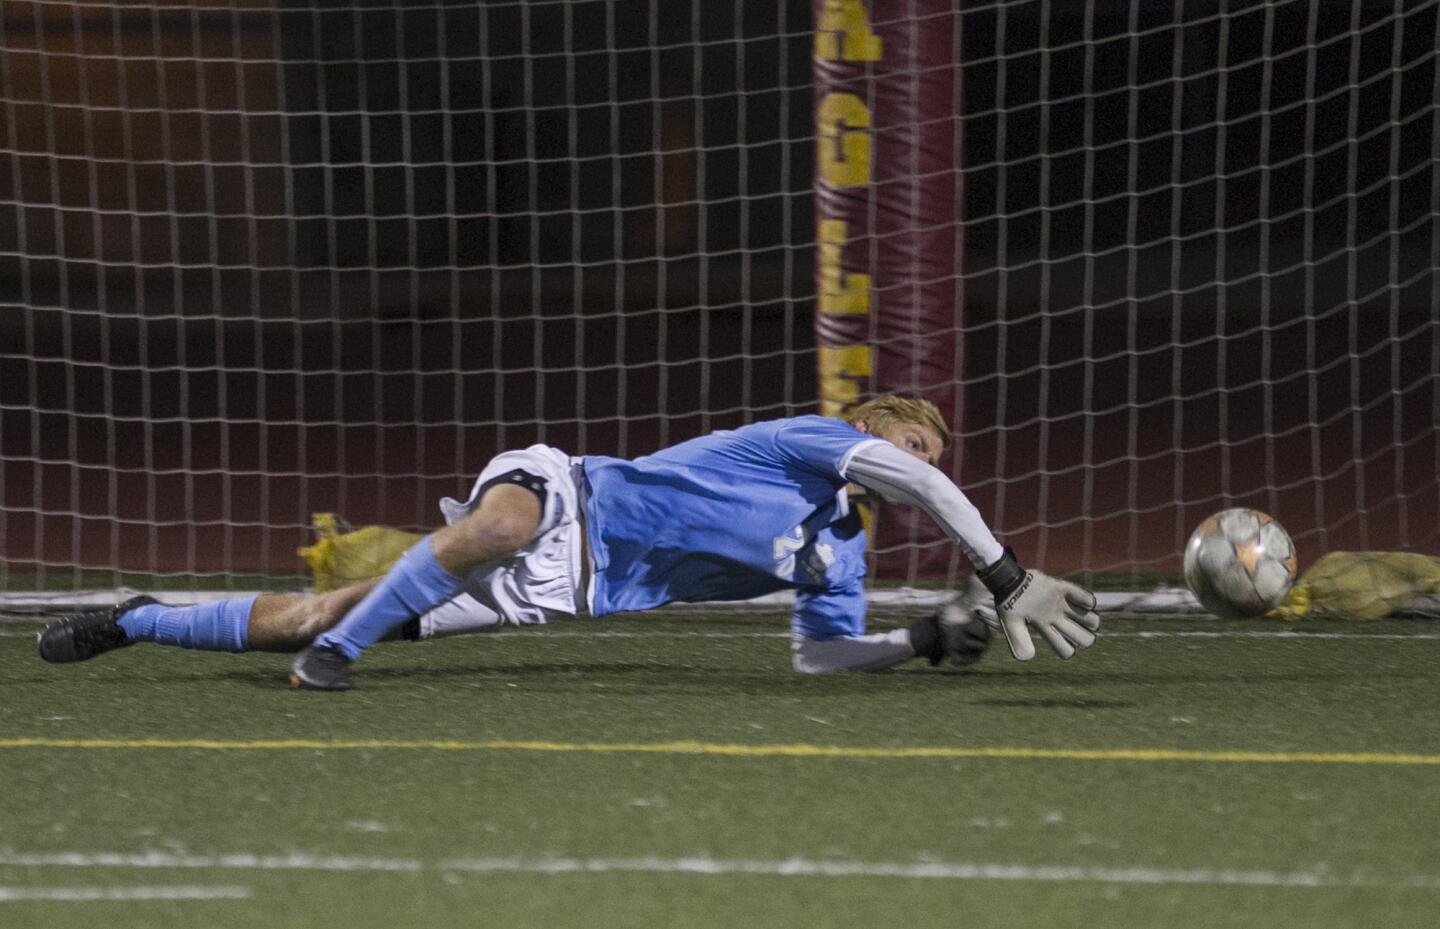 Corona del Mar's Gavin Allen dives for a save on goal during a game against Estancia on Wednesday, December 17.